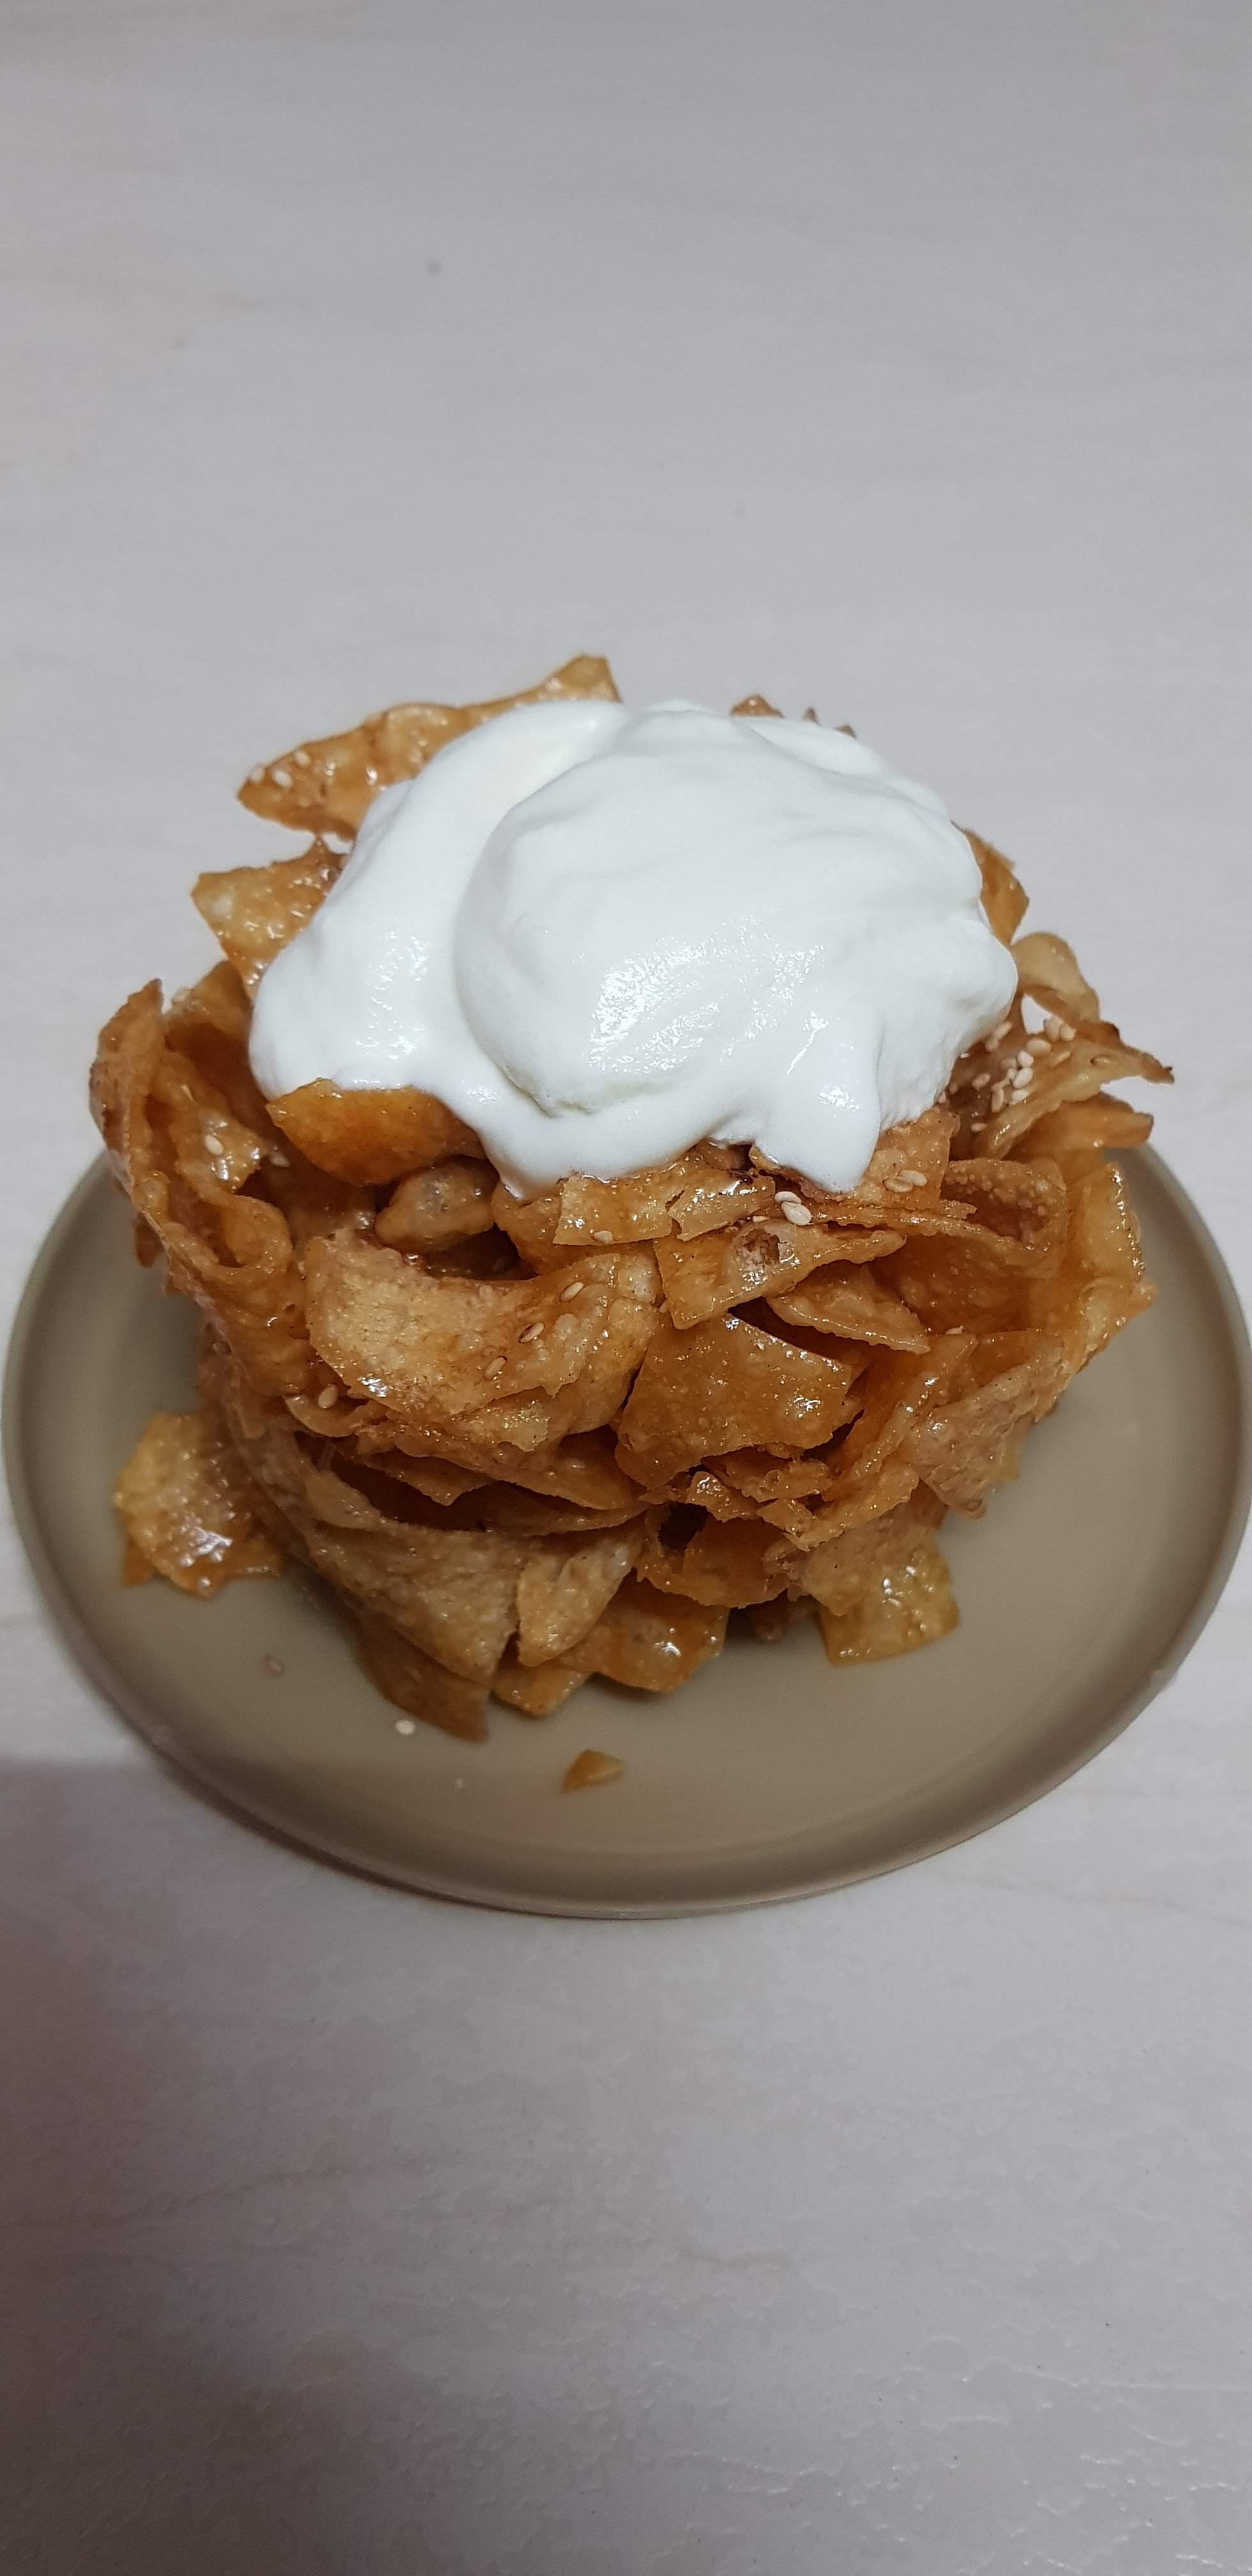 Dish,Food,Cuisine,Sour cream,Ingredient,Whipped cream,Dessert,Fried food,Bread pudding,Produce